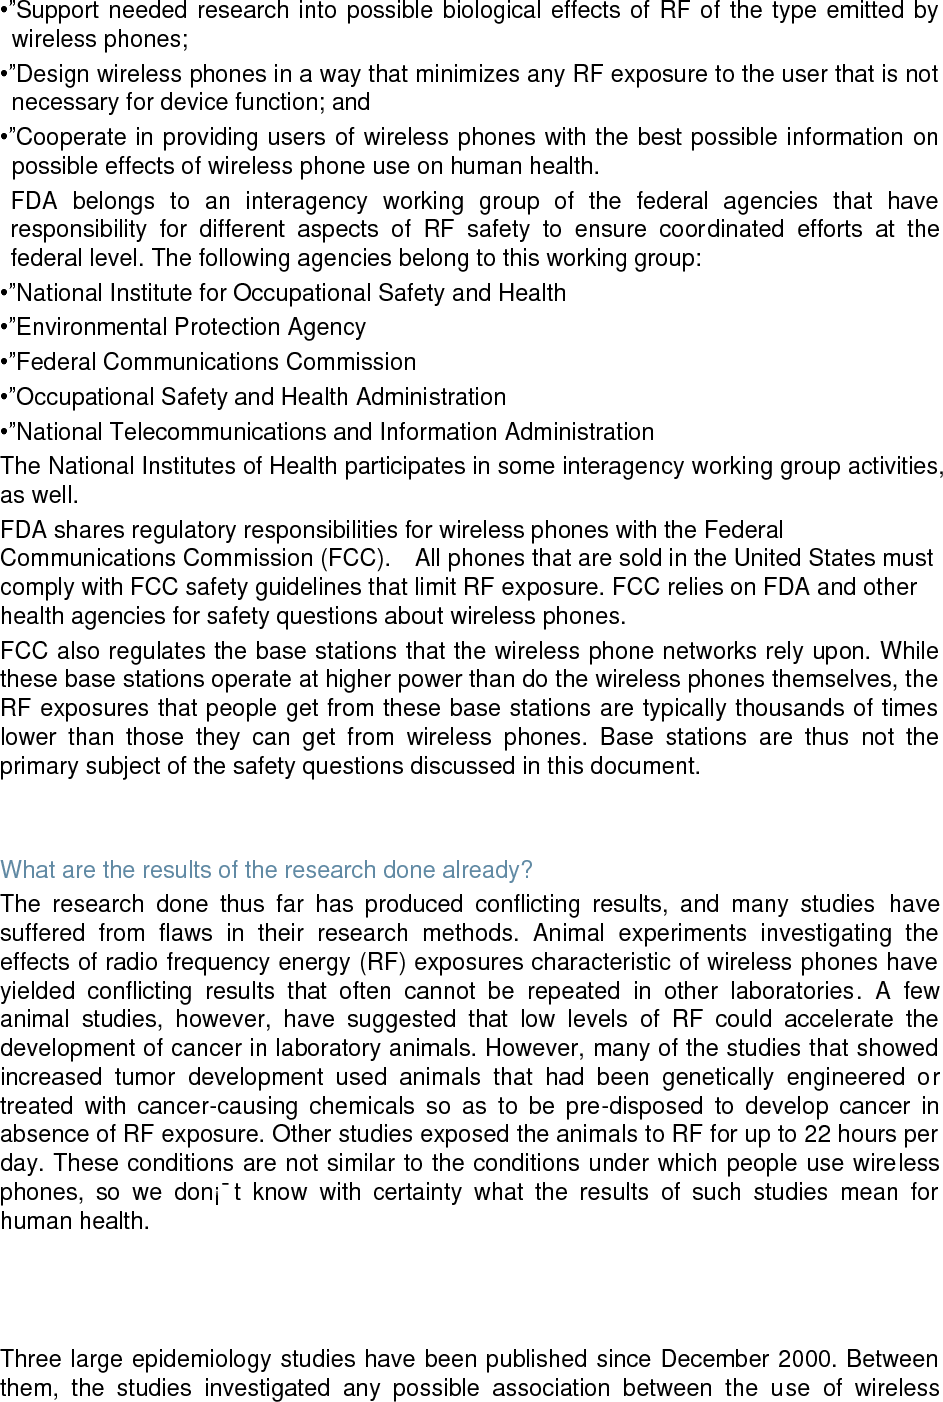 •”Support  needed research into possible biological effects  of RF of the type emitted  by wireless phones; •”Design wireless phones in a way that minimizes any RF exposure to the user that is not necessary for device function; and •”Cooperate in providing users of wireless phones with the best possible information on possible effects of wireless phone use on human health. FDA  belongs  to  an  interagency  working  group  of  the  federal  agencies  that  have responsibility  for  different  aspects  of  RF  safety  to  ensure  coordinated  efforts  at  the federal level. The following agencies belong to this working group: •”National Institute for Occupational Safety and Health •”Environmental Protection Agency •”Federal Communications Commission •”Occupational Safety and Health Administration •”National Telecommunications and Information Administration The National Institutes of Health participates in some interagency working group activities, as well. FDA shares regulatory responsibilities for wireless phones with the Federal Communications Commission (FCC).    All phones that are sold in the United States must comply with FCC safety guidelines that limit RF exposure. FCC relies on FDA and other health agencies for safety questions about wireless phones. FCC also regulates the base stations that the wireless phone networks rely upon. While these base stations operate at higher power than do the wireless phones themselves, the RF exposures that people get from these base stations are typically thousands of times lower  than  those  they  can  get  from  wireless  phones.  Base  stations  are  thus  not  the primary subject of the safety questions discussed in this document.   What are the results of the research done already? The  research  done  thus  far  has  produced  conflicting  results,  and  many  studies  have suffered  from  flaws  in  their  research  methods.  Animal  experiments  investigating  the effects of radio frequency energy (RF) exposures characteristic of wireless phones have yielded  conflicting  results  that  often  cannot  be  repeated  in  other  laboratories.  A  few animal  studies,  however,  have  suggested  that  low  levels  of  RF  could  accelerate  the development of cancer in laboratory animals. However, many of the studies that showed increased  tumor  development  used  animals  that  had  been  genetically  engineered  or treated  with  cancer-causing  chemicals  so  as  to  be  pre-disposed  to  develop  cancer  in absence of RF exposure. Other studies exposed the animals to RF for up to 22 hours per day. These conditions are not similar to the conditions under which people use wireless phones,  so  we  don¡¯t  know  with  certainty  what  the  results  of  such  studies  mean  for human health.    Three large epidemiology studies have been published since December 2000. Between them,  the  studies  investigated  any  possible  association  between  the  use  of  wireless 